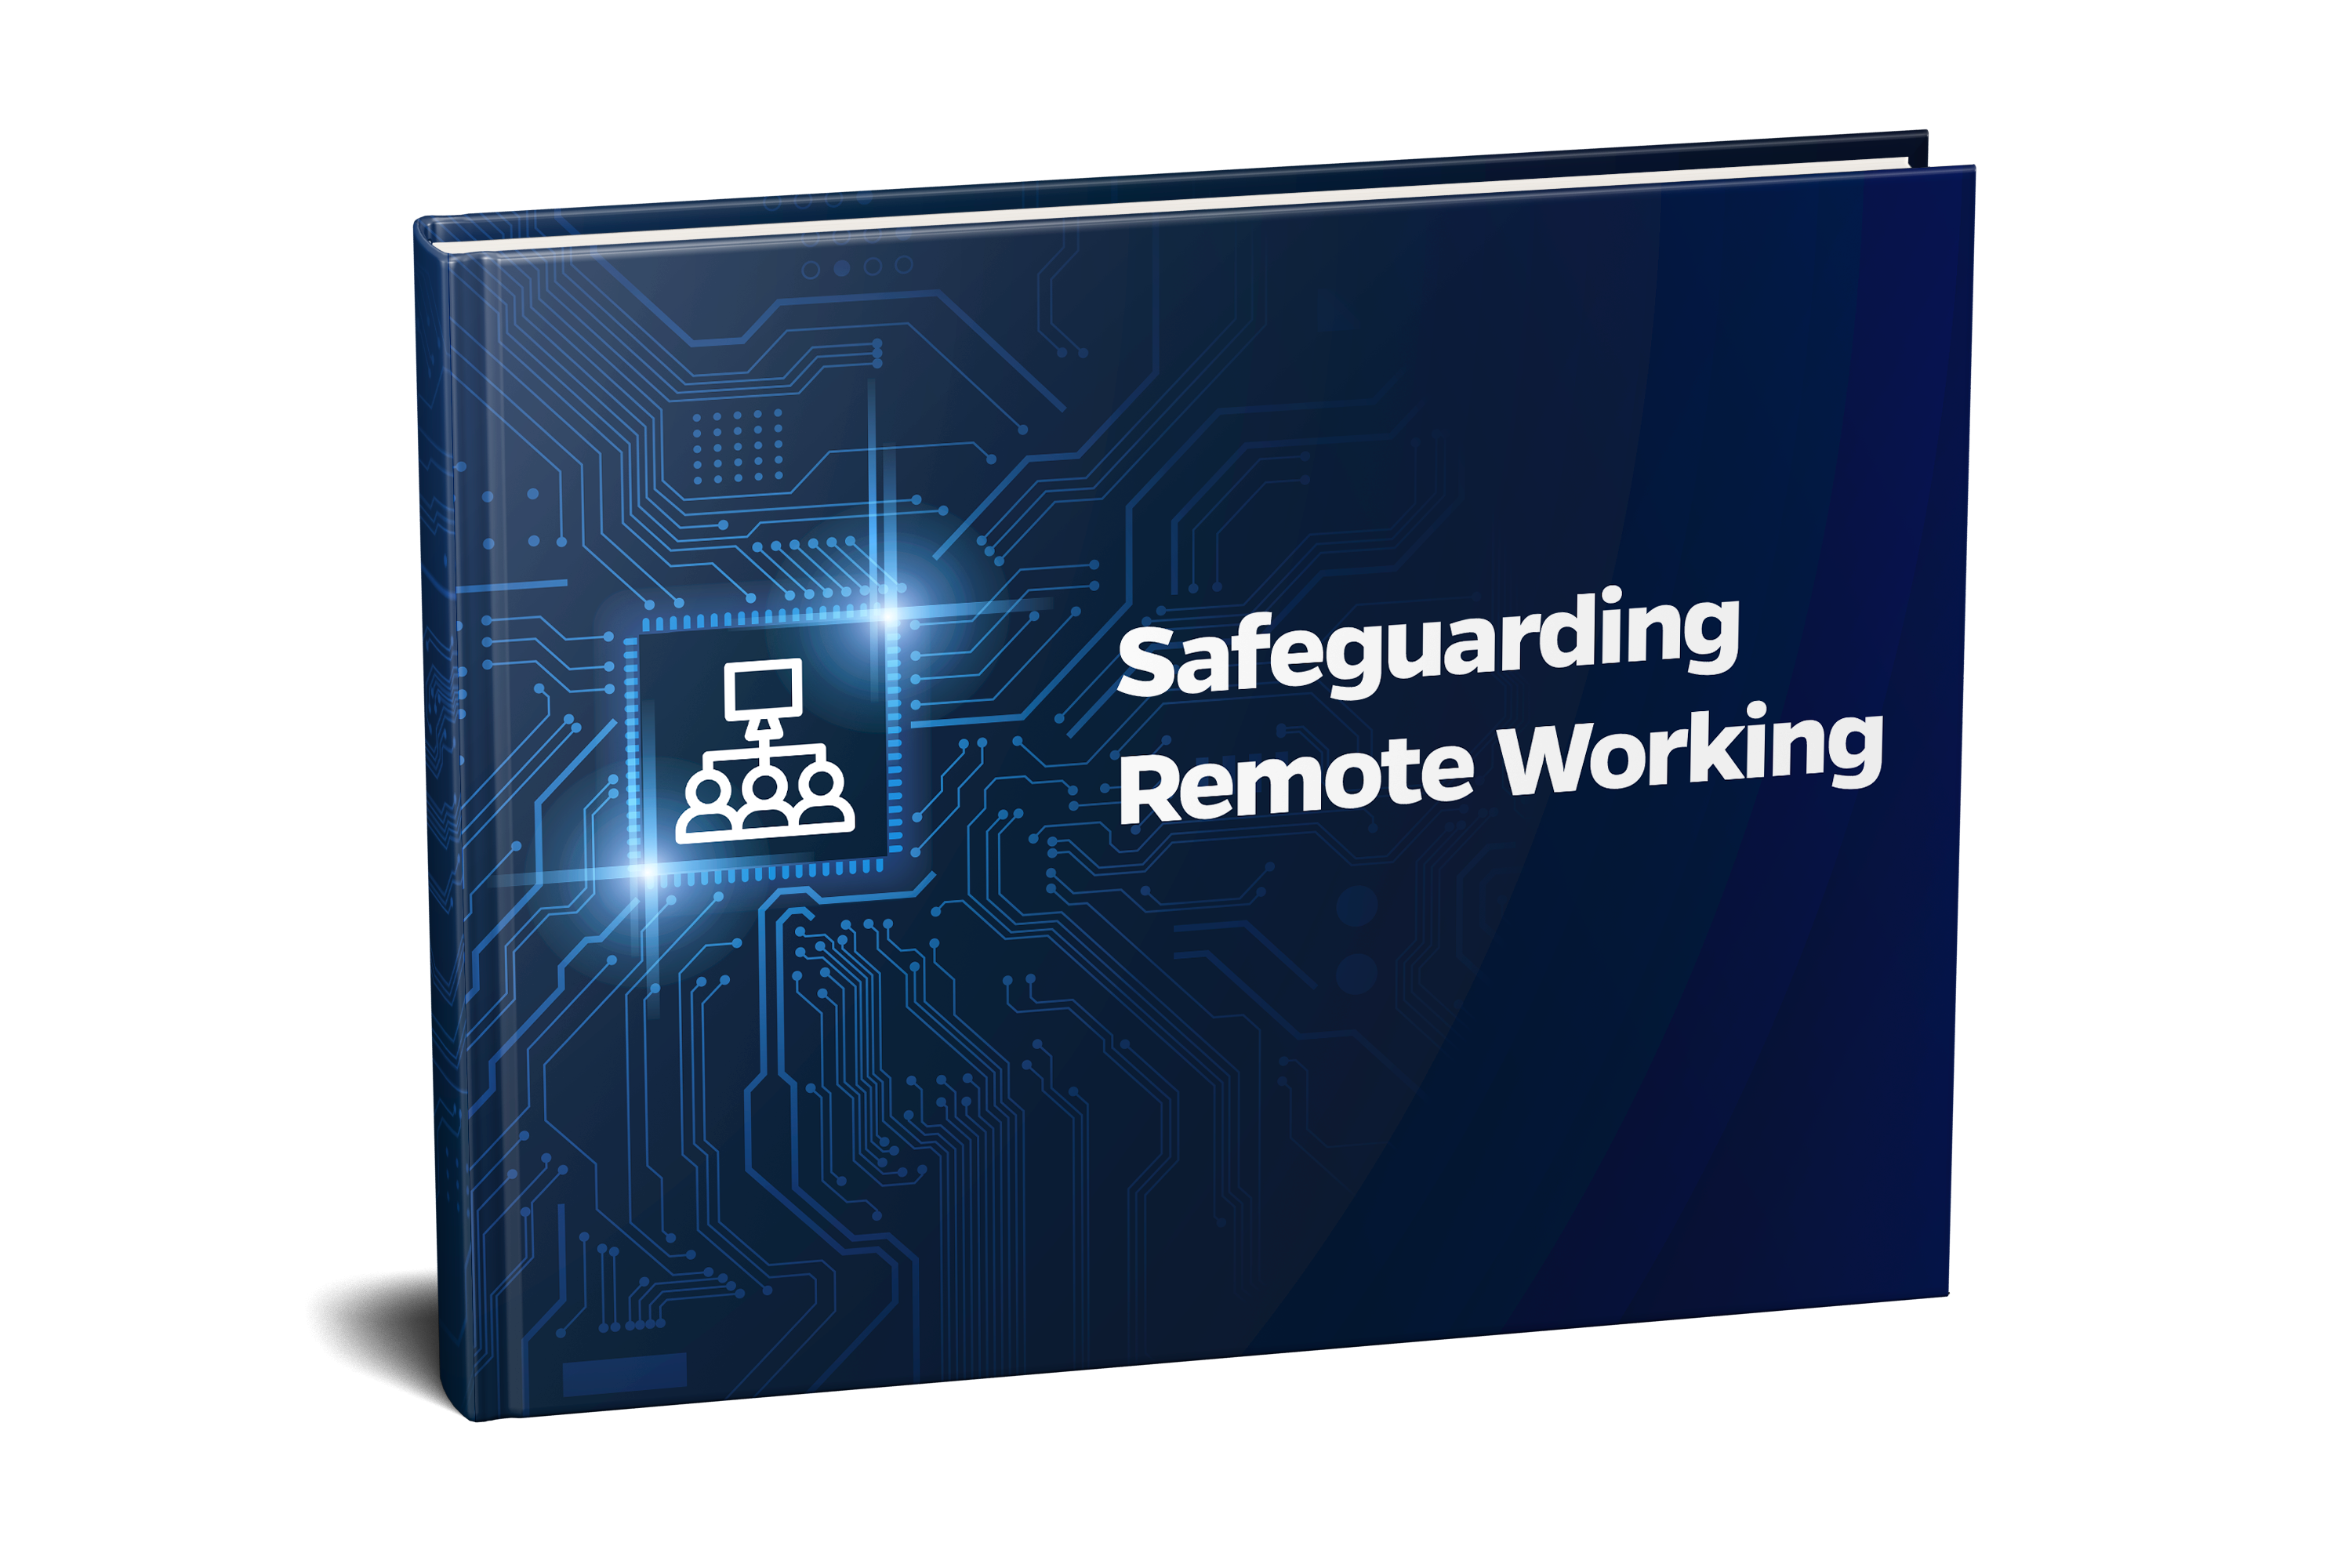 Safeguarding Remote Working